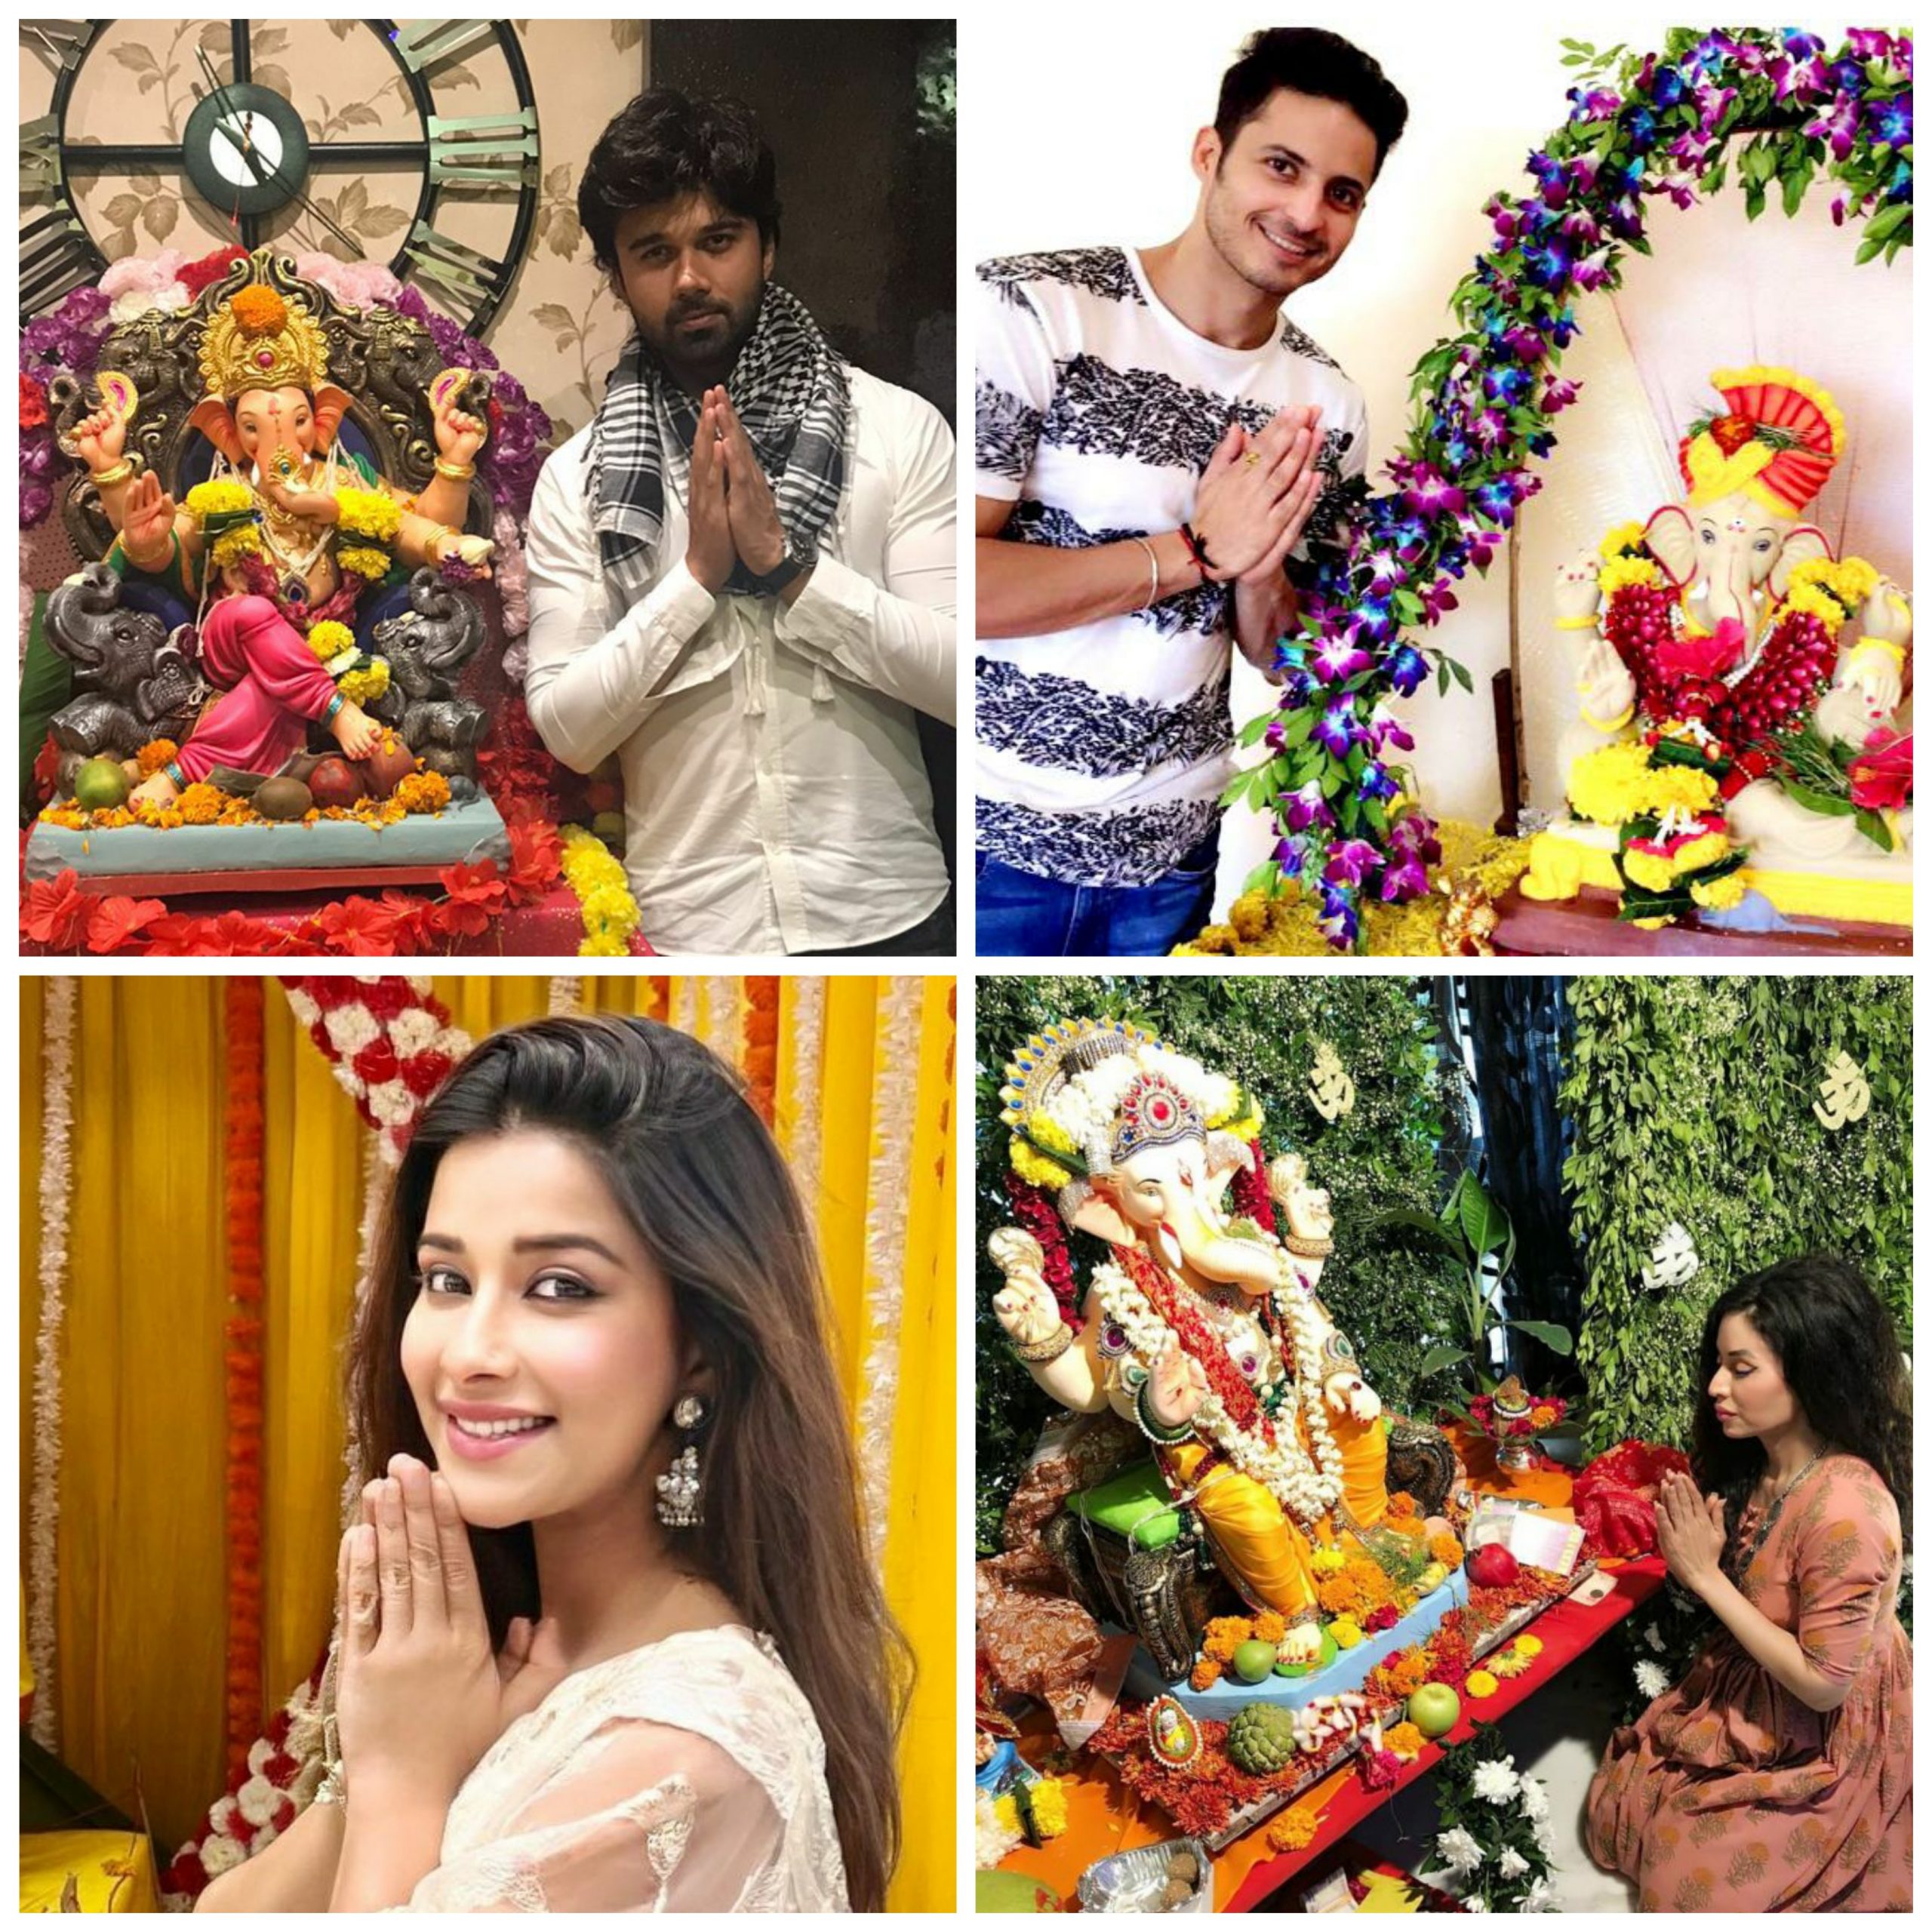 Celebs wish happiness and positivity on Ganesh Chaturthi, requests everyone to follow precautions while making merry